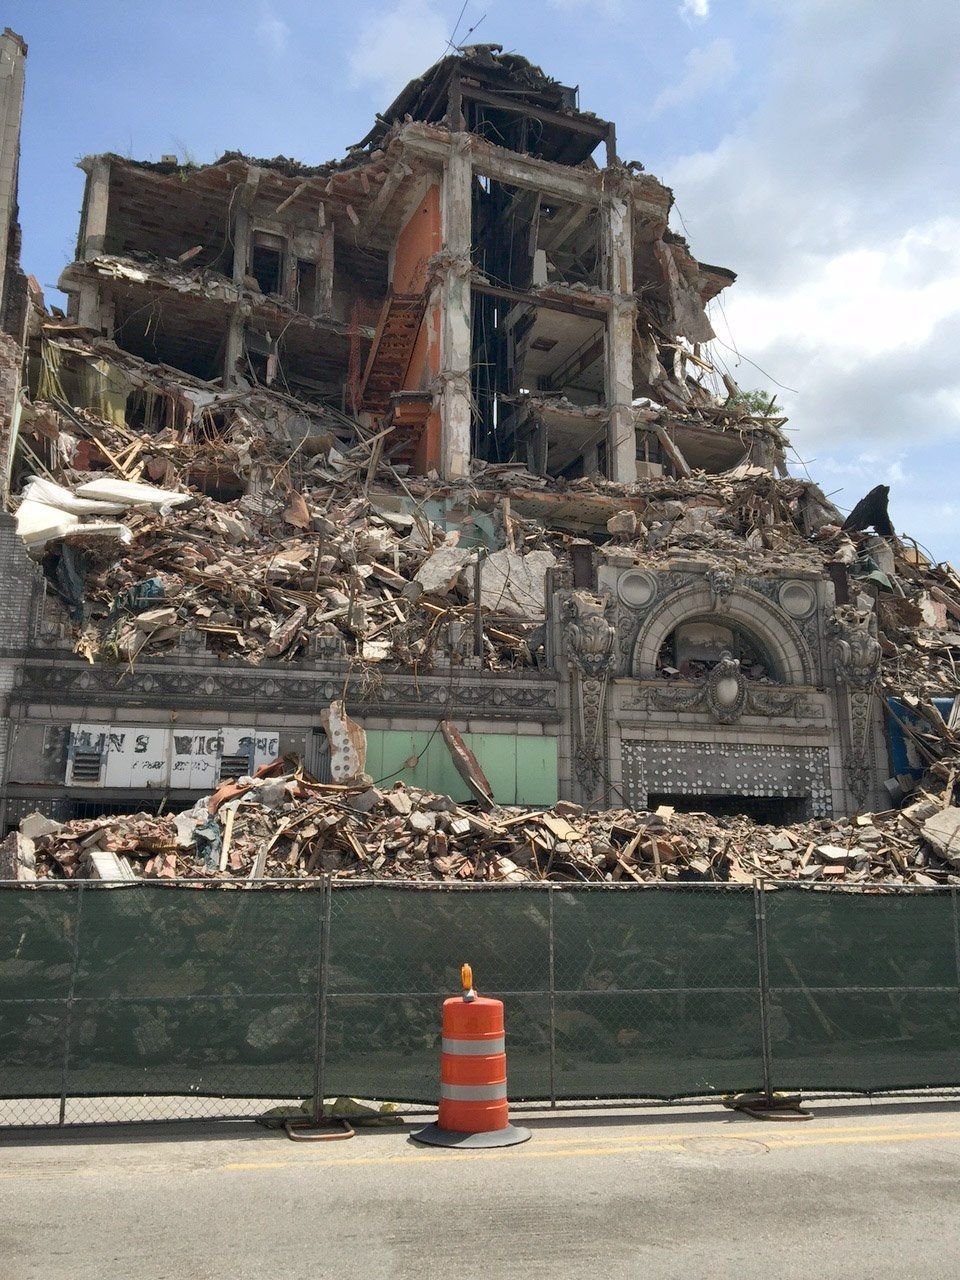 Landmark Murphy Building in East St. Louis largely reduced to rubble | Illinois | www.cinemas93.org